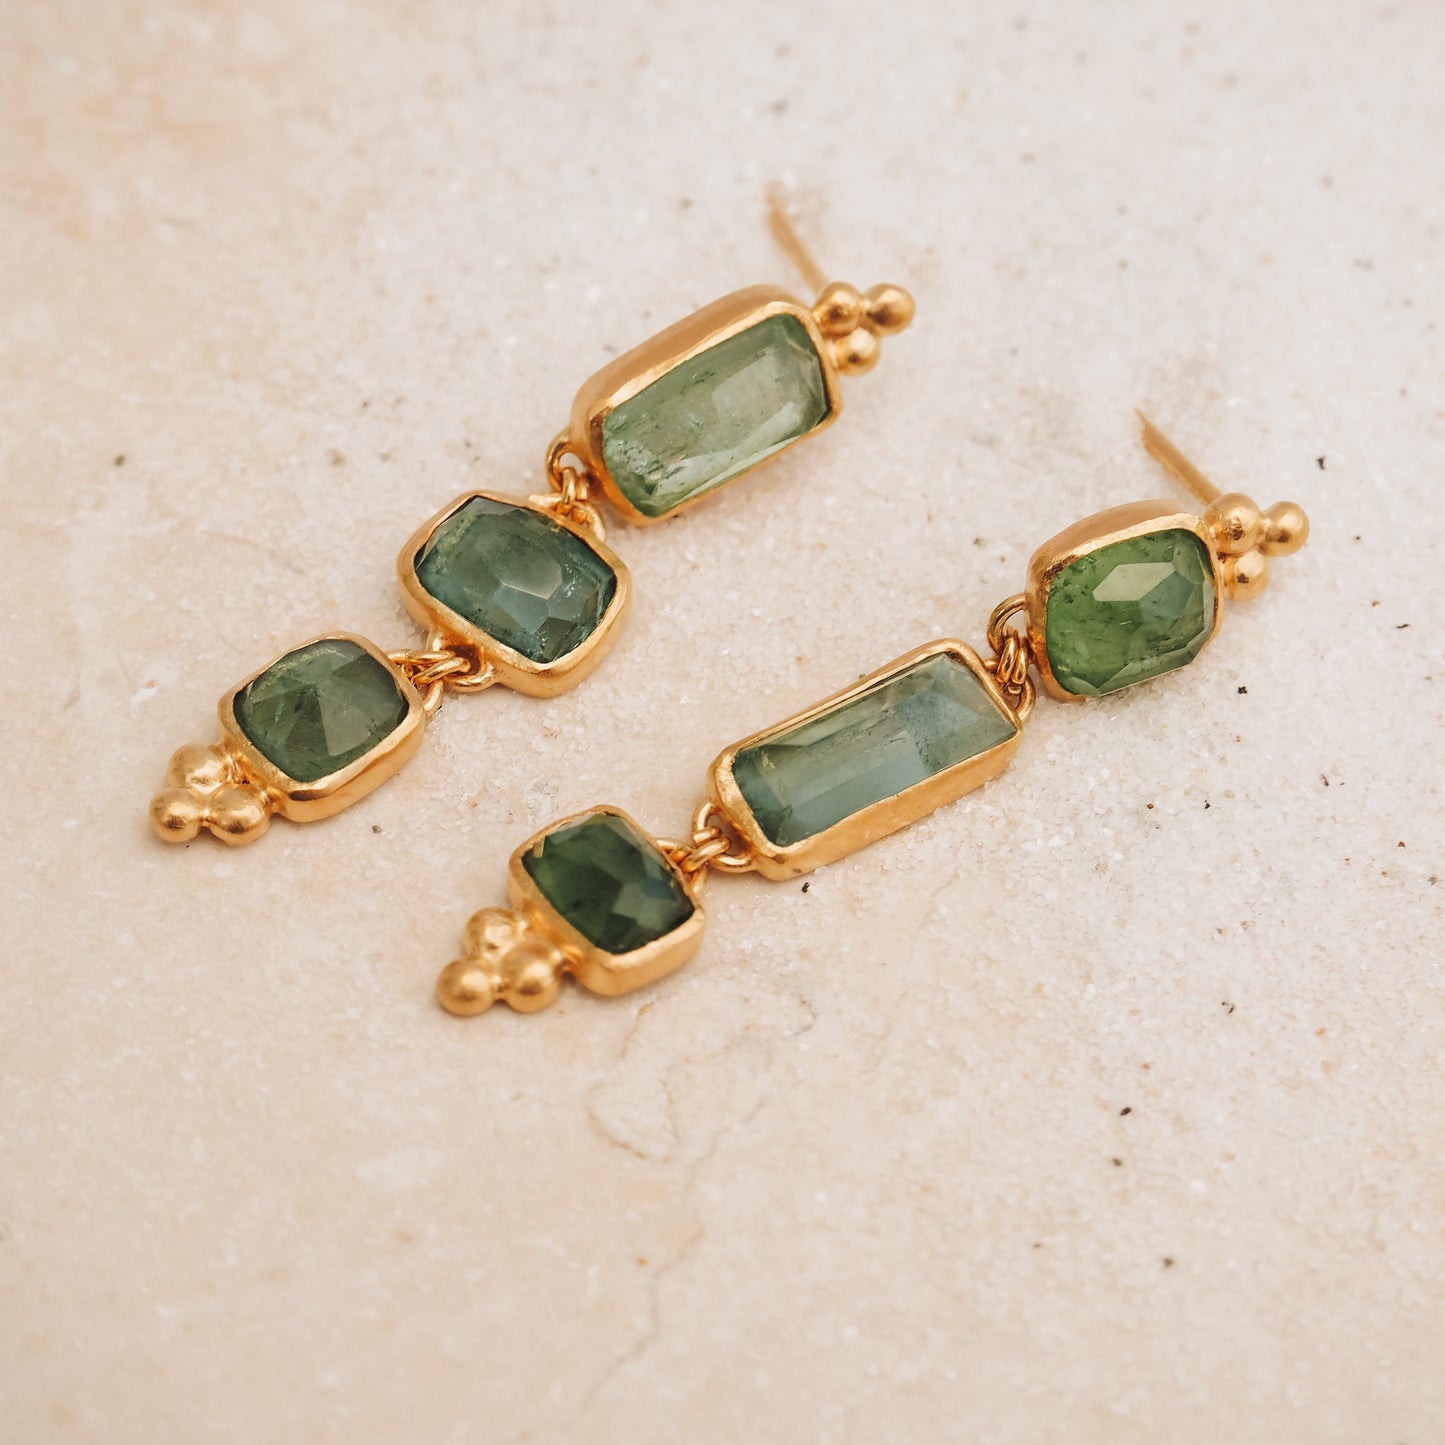 Dainty gold earrings with square rose cut tourmaline gemstone drops in ocean blue and green, embellished with stunning granulation detail